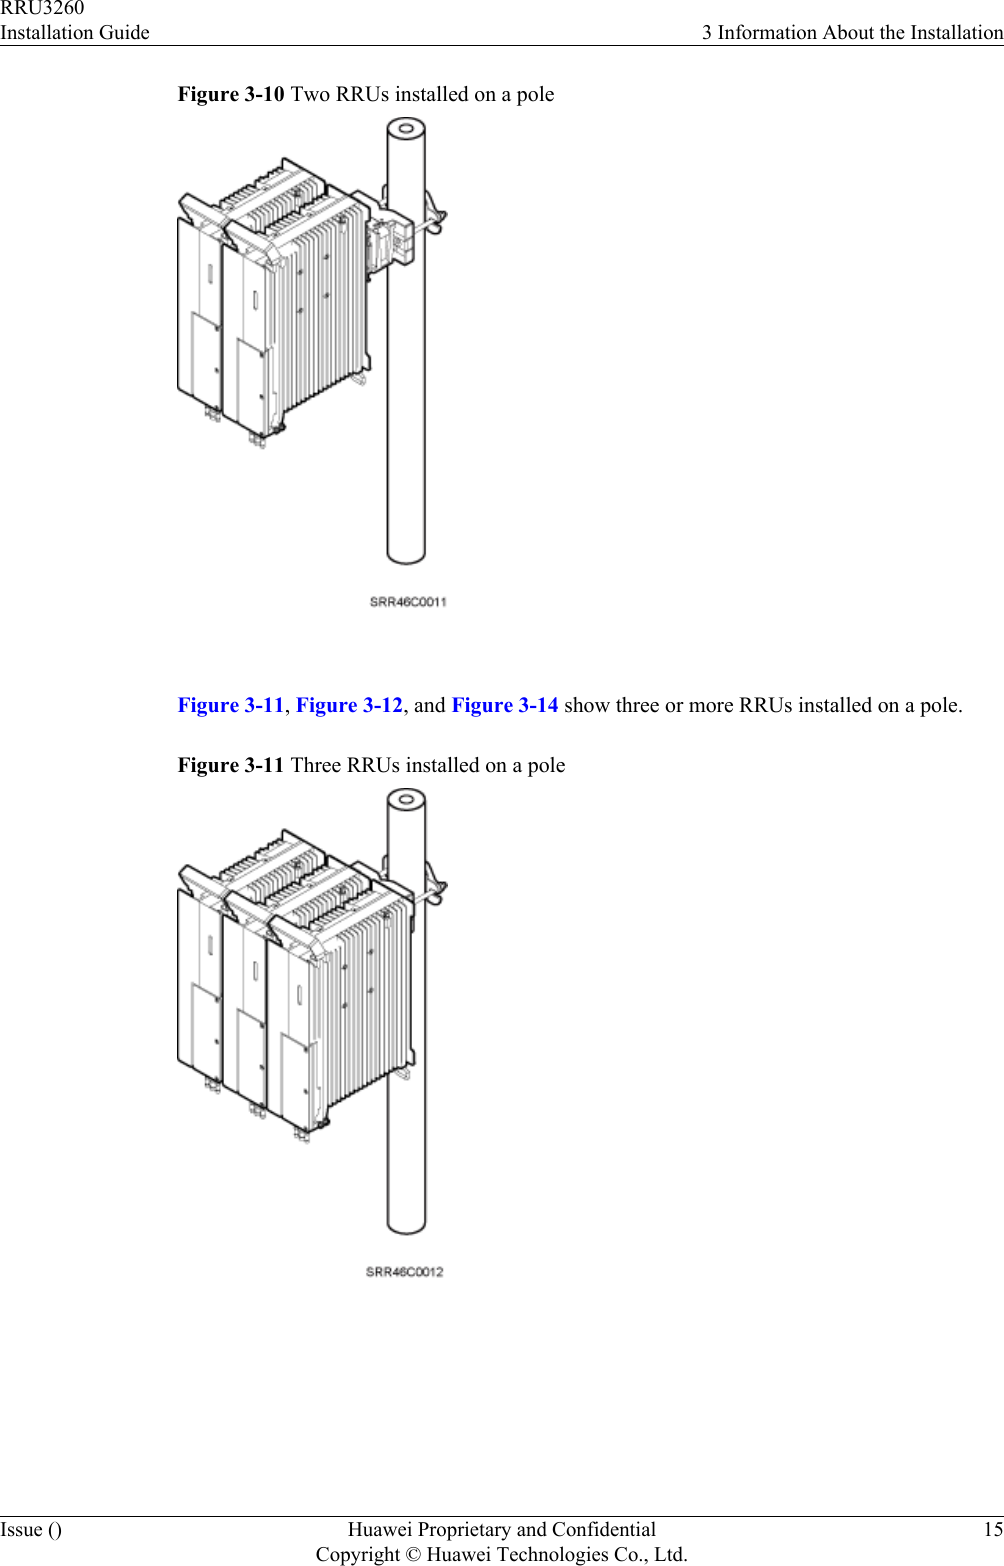 Figure 3-10 Two RRUs installed on a pole Figure 3-11, Figure 3-12, and Figure 3-14 show three or more RRUs installed on a pole.Figure 3-11 Three RRUs installed on a pole RRU3260Installation Guide 3 Information About the InstallationIssue () Huawei Proprietary and ConfidentialCopyright © Huawei Technologies Co., Ltd.15